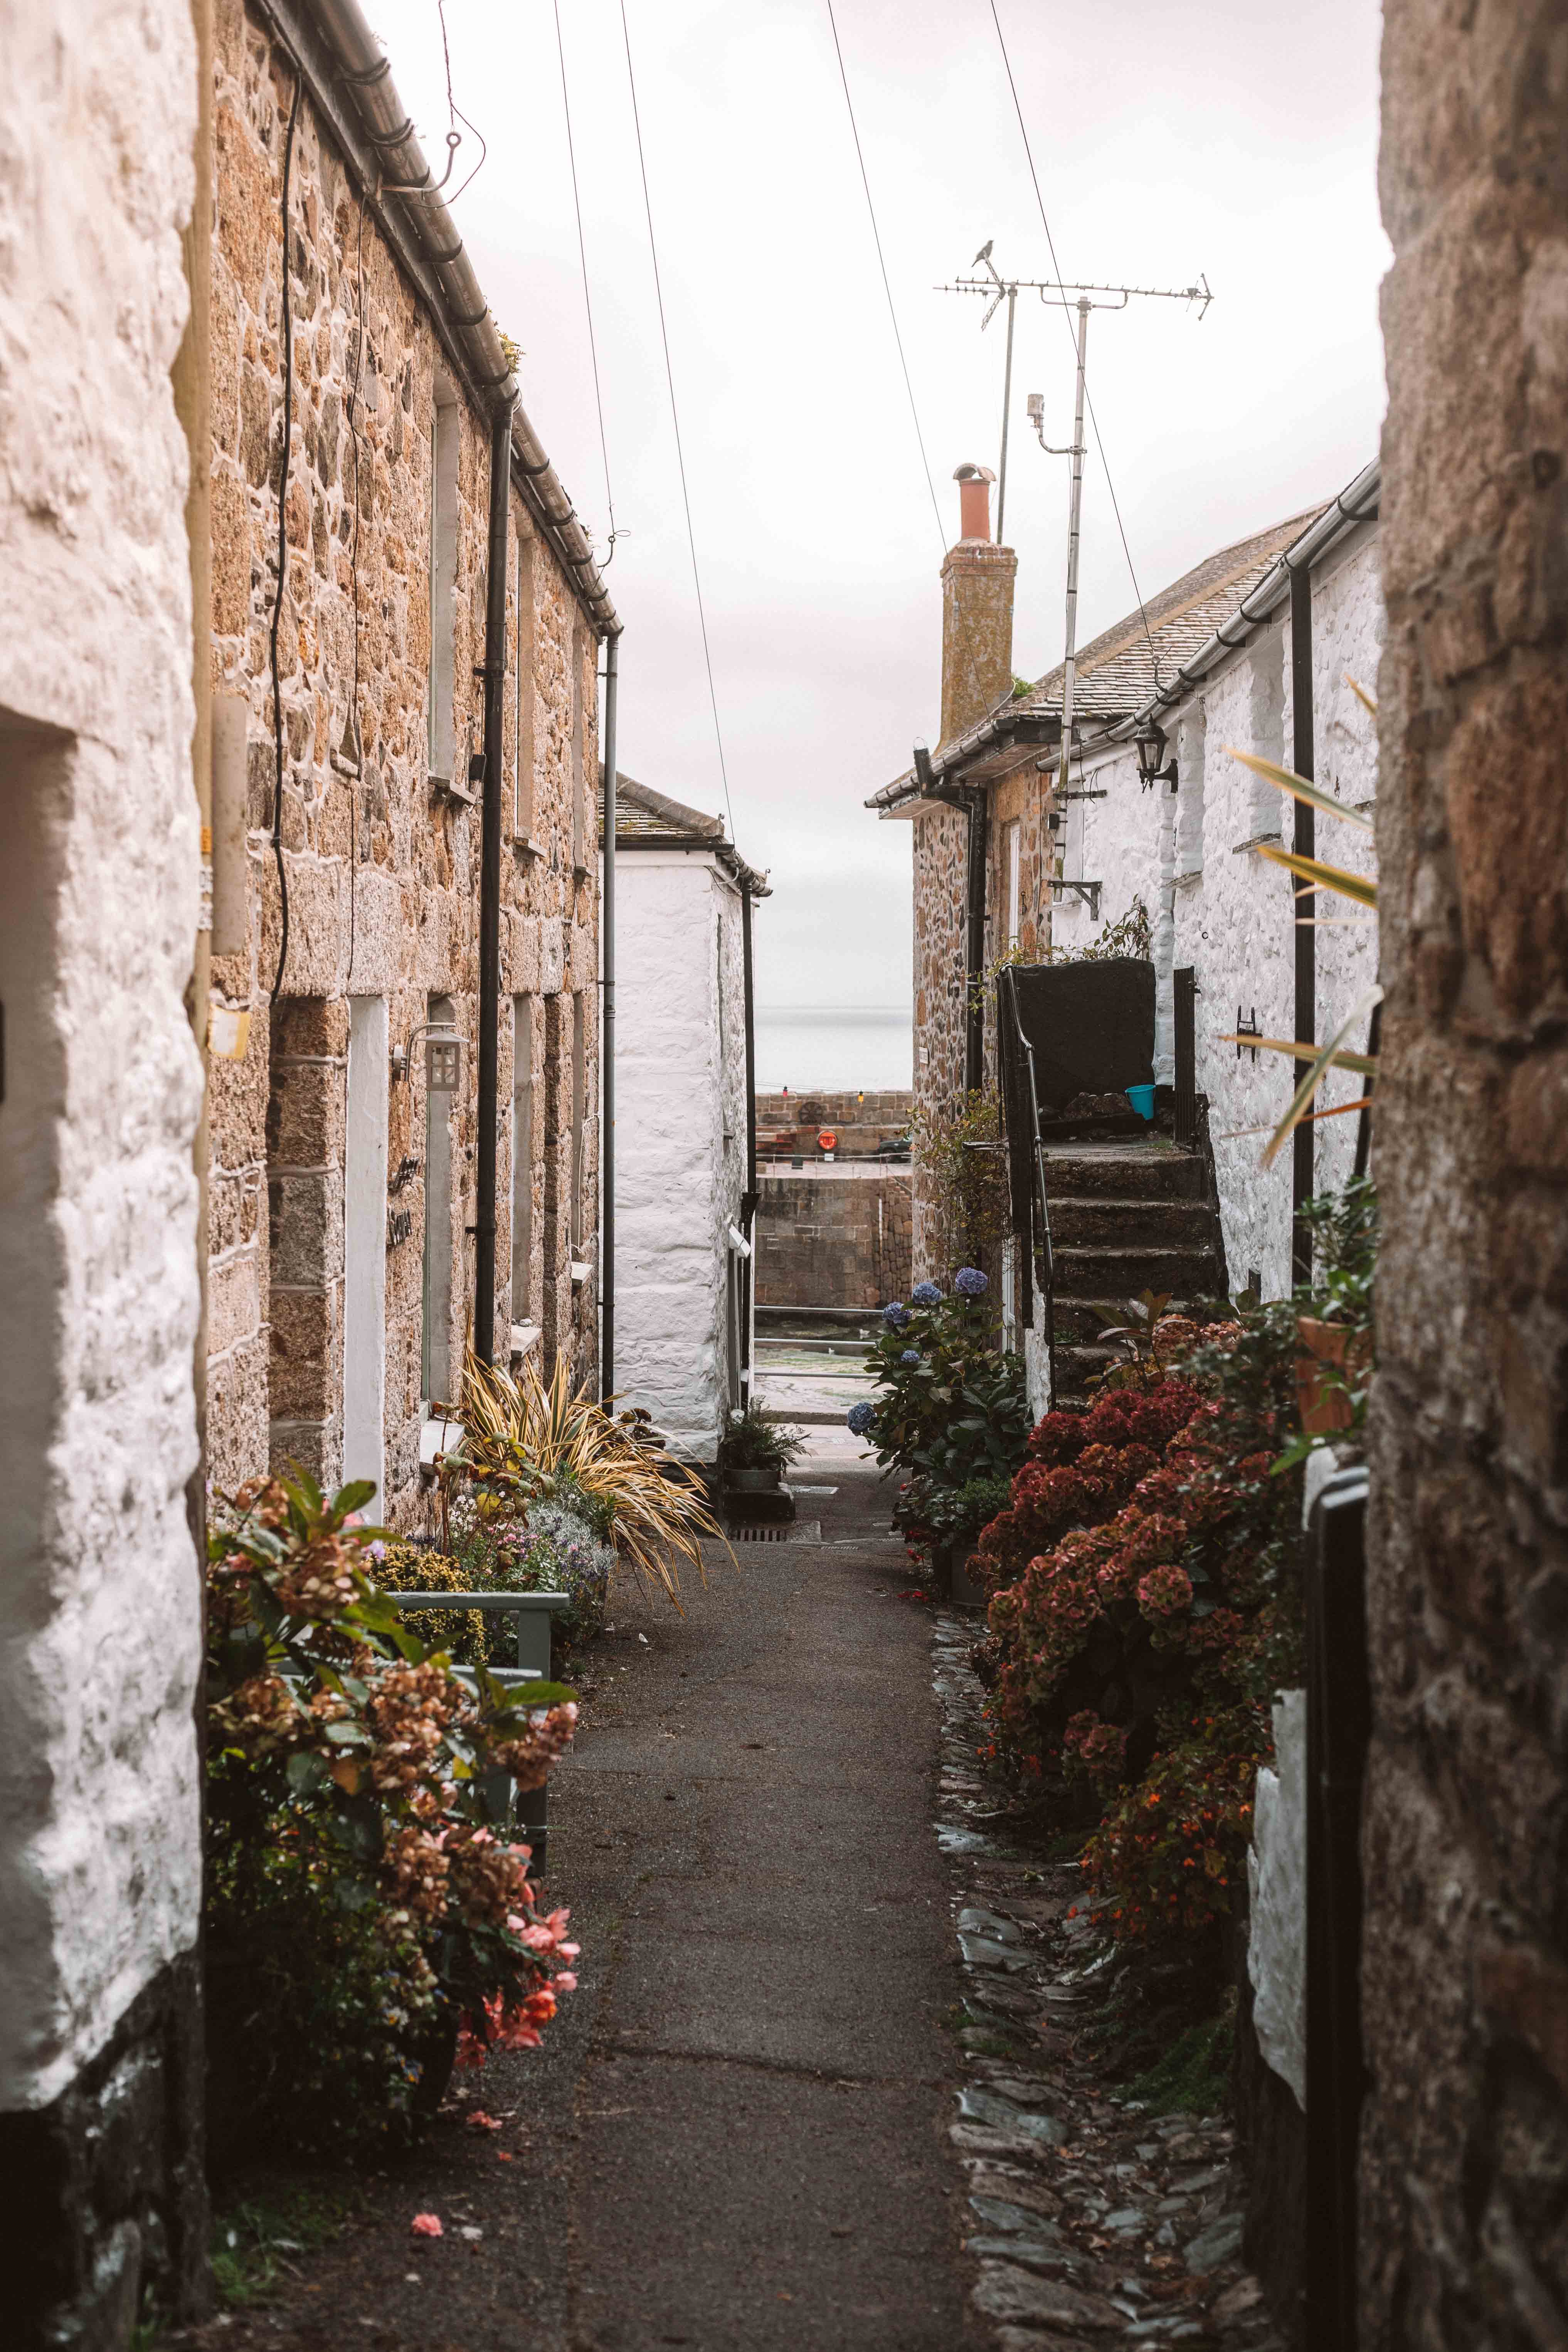 Small alleyway in Mousehole village, Cornwall